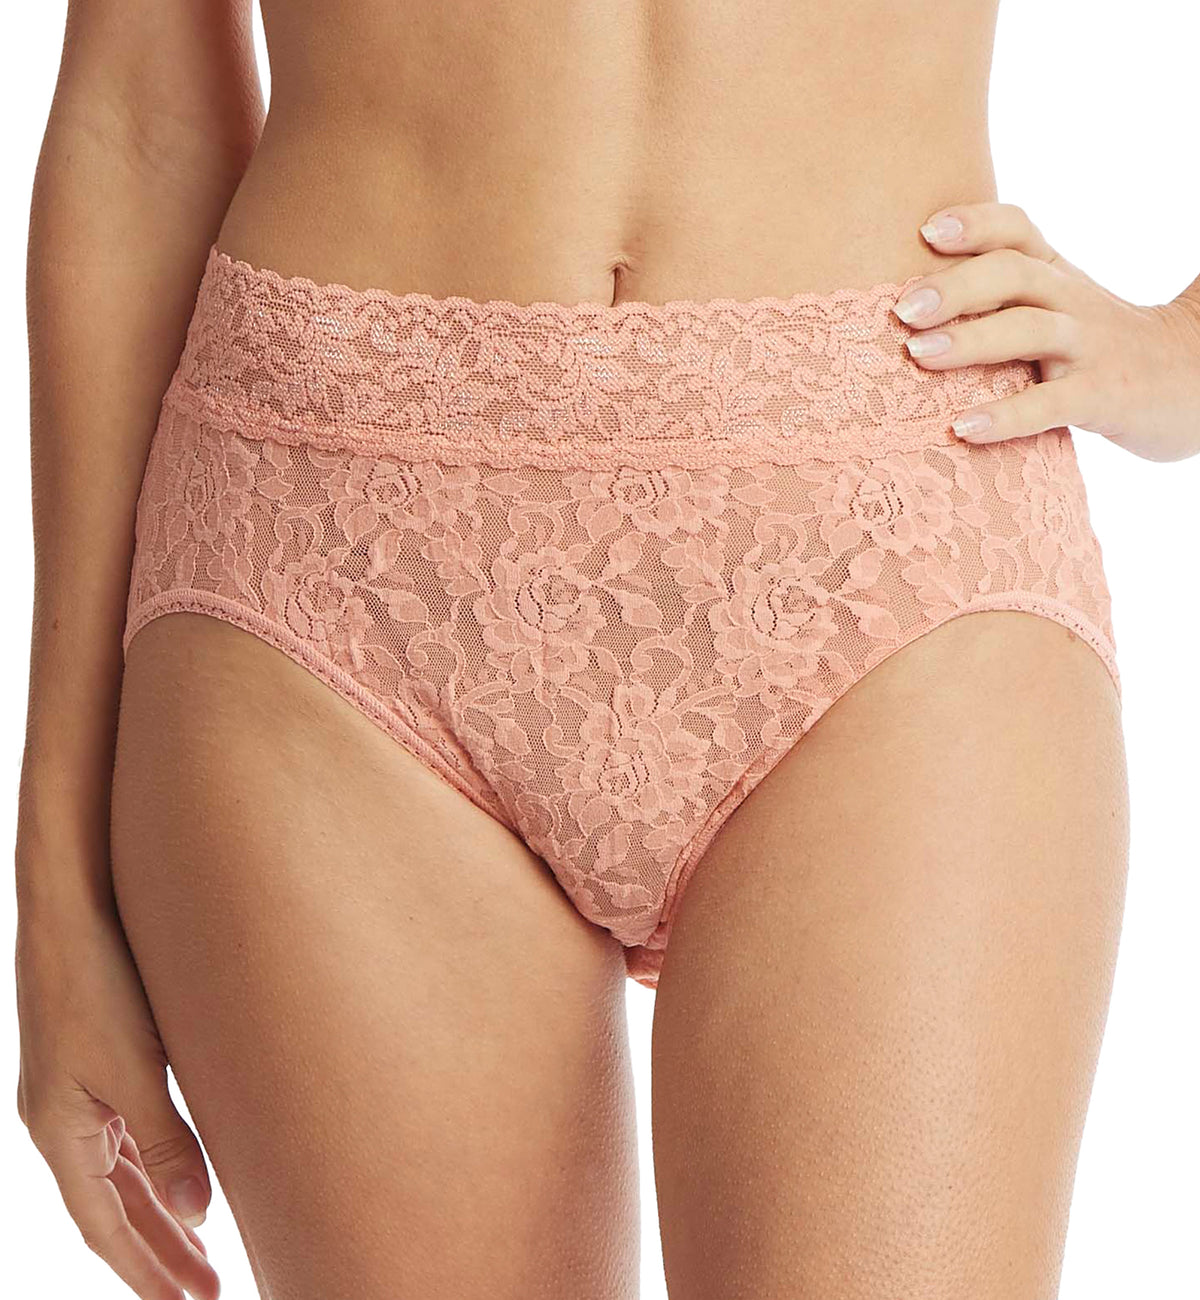 Hanky Panky Signature Lace French Brief (461),Small,Snapdragon - Snapdragon,Small